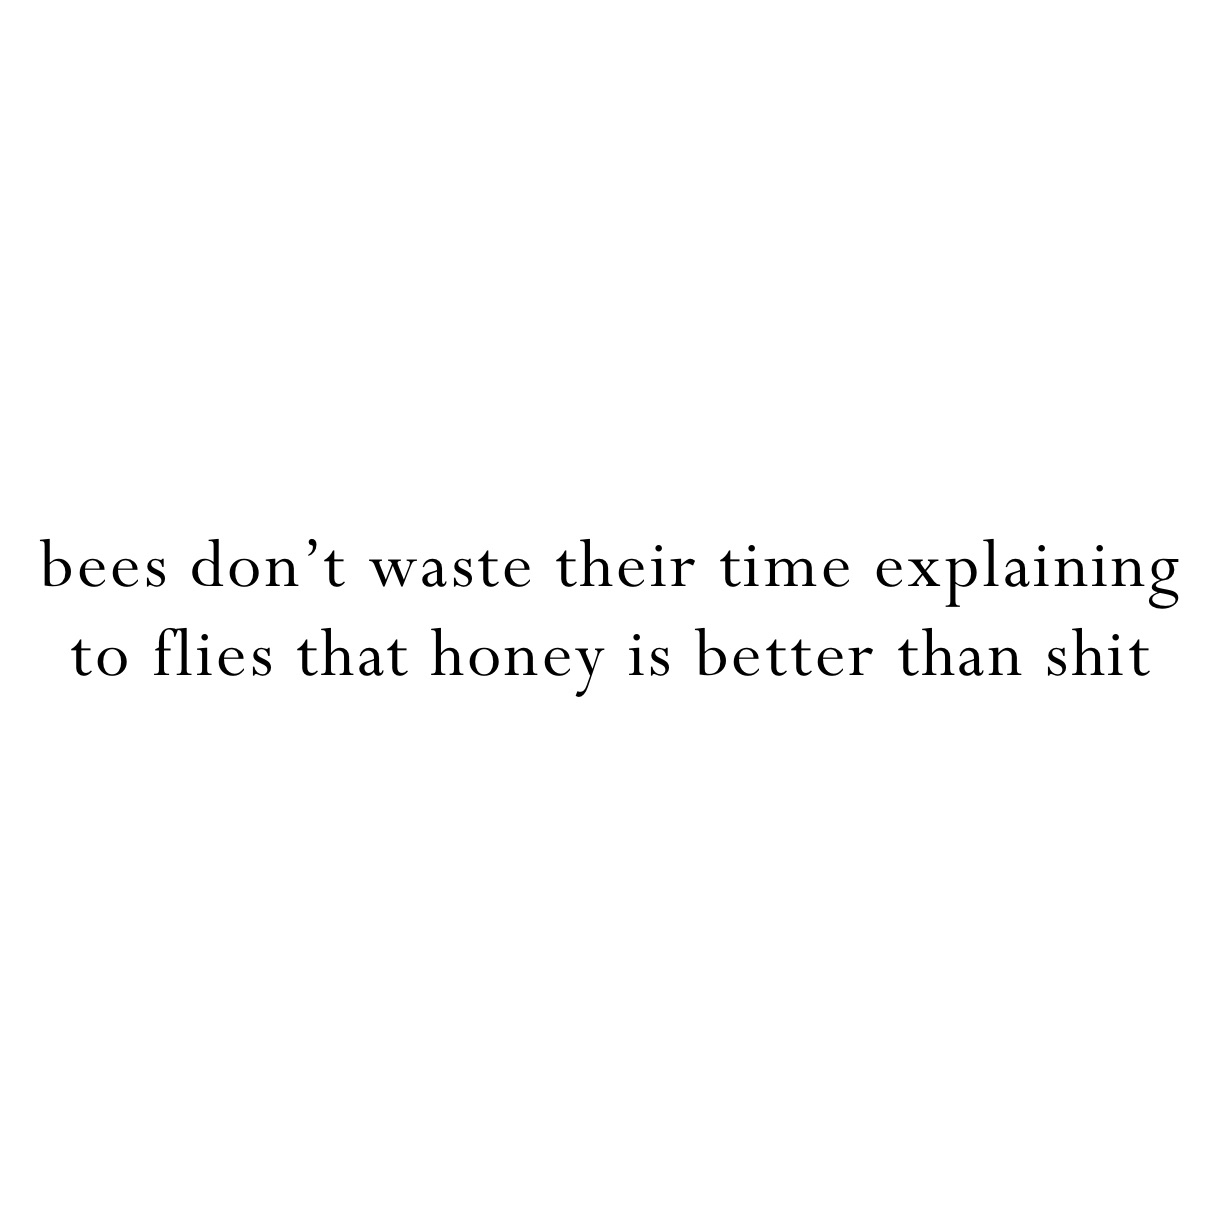 bees don’t waste their time explaining to flies that honey is better than shit 